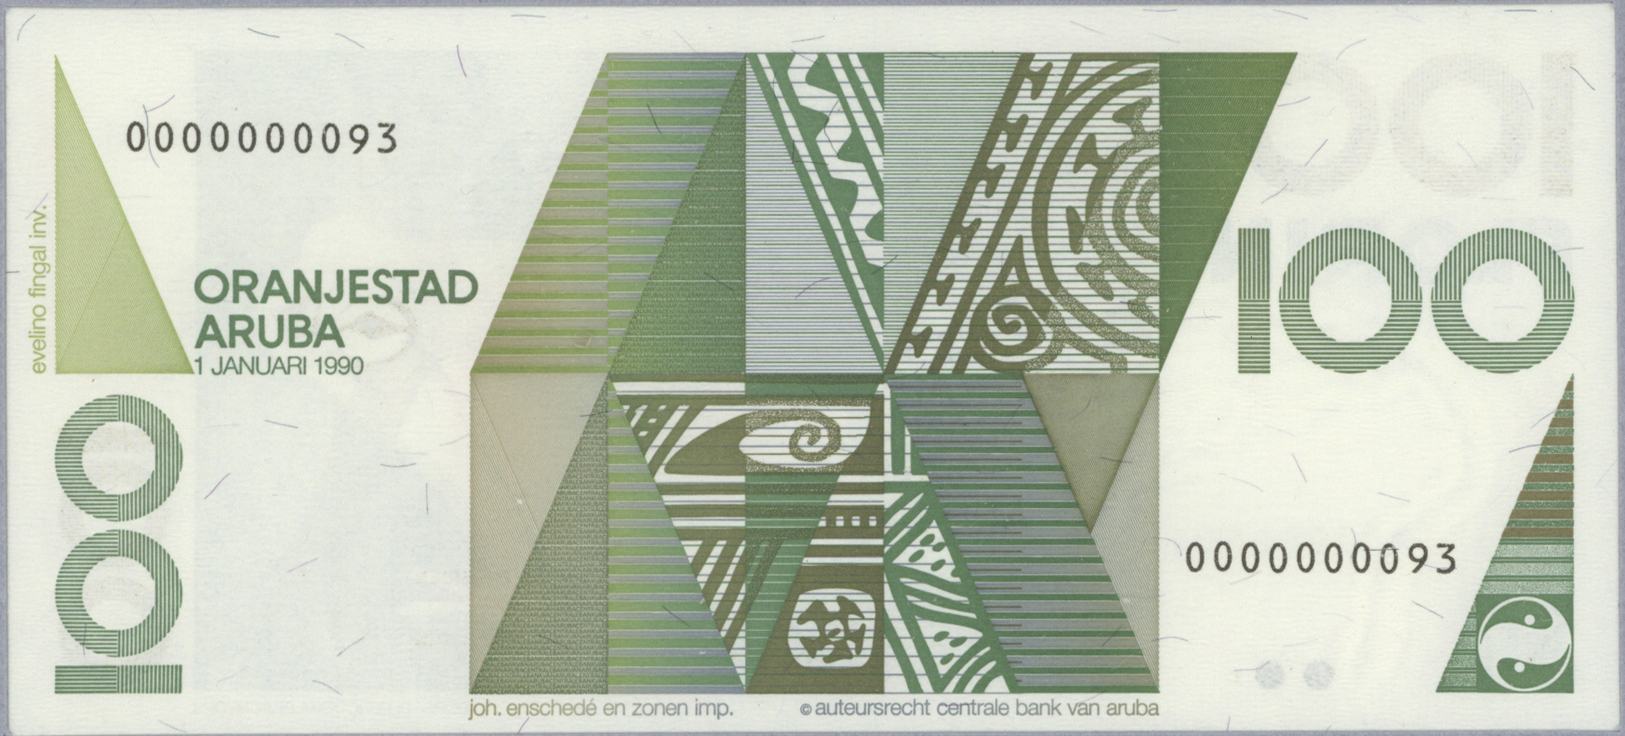 00063 Aruba: official collectors book issued by the Central Bank of Aruba commemorating the first Banknote series of Nat